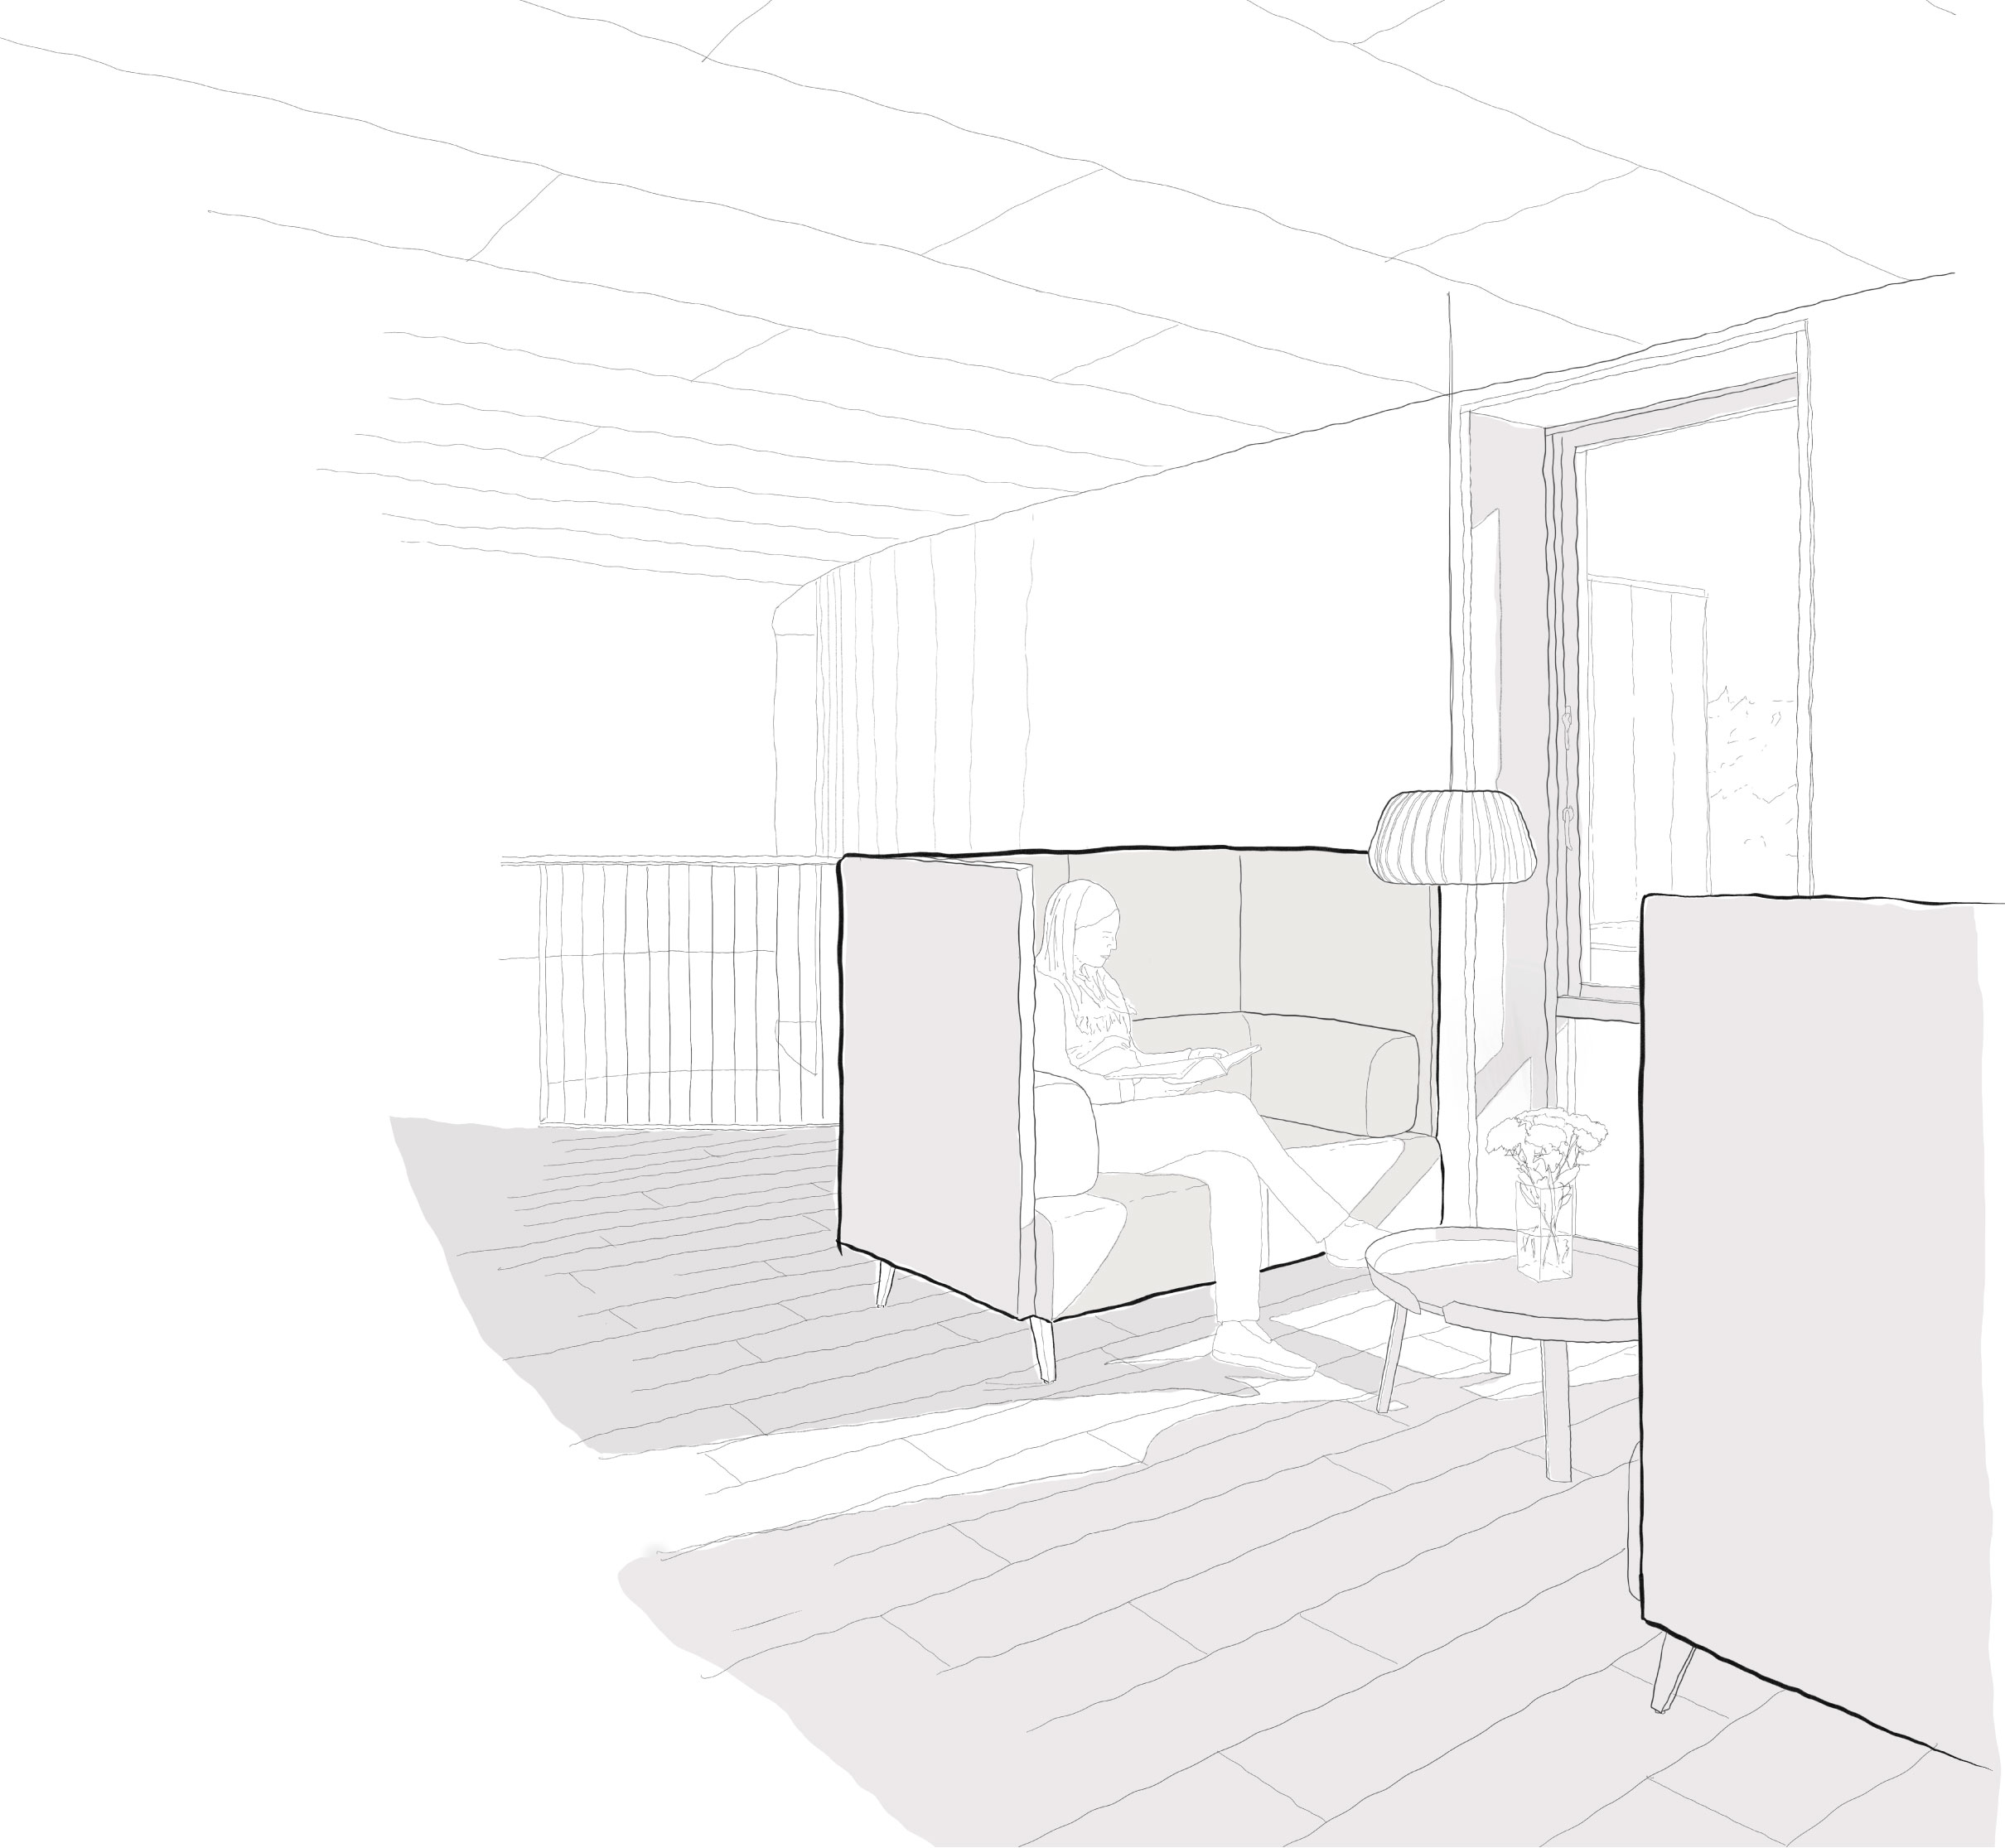 'Moment drawing' - Urban Hospice by NORD Architects